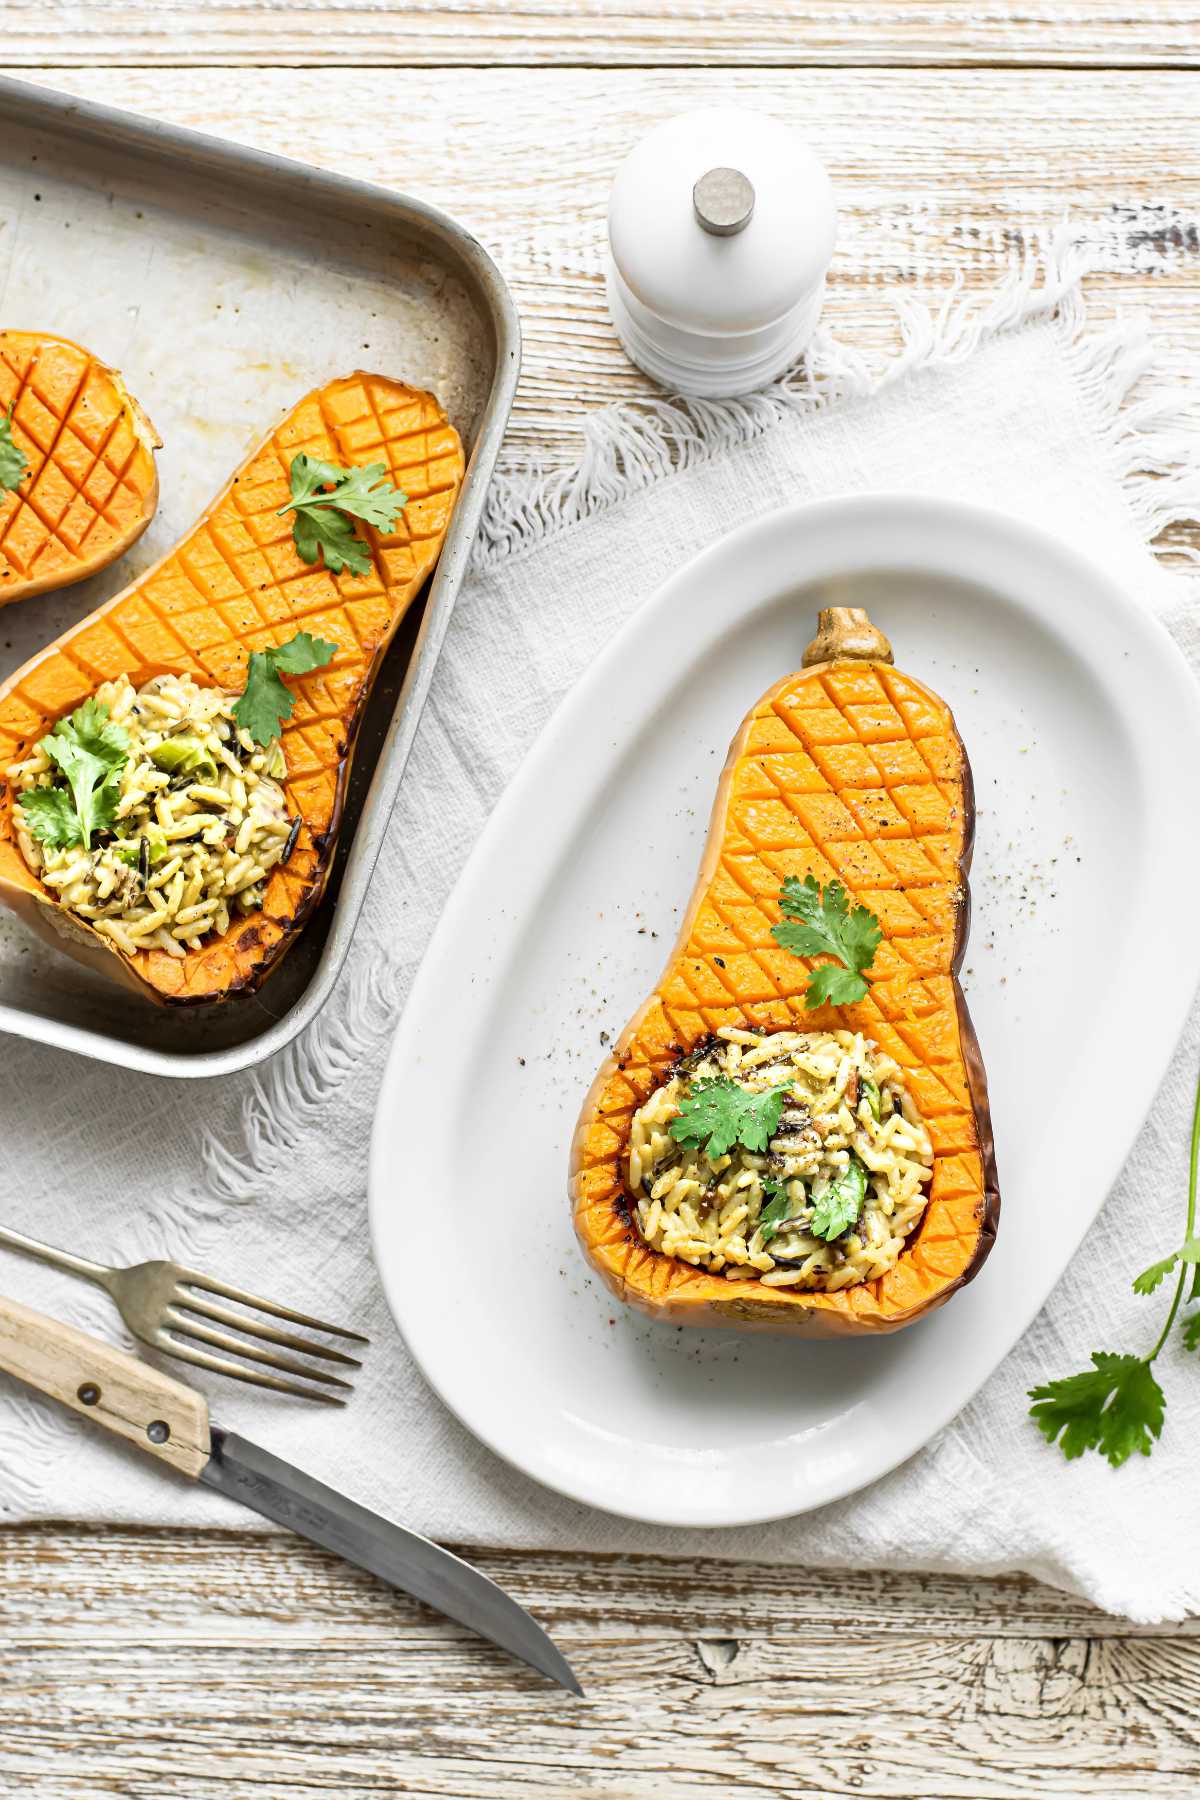 Butternut squash stuffed with rice on white plate